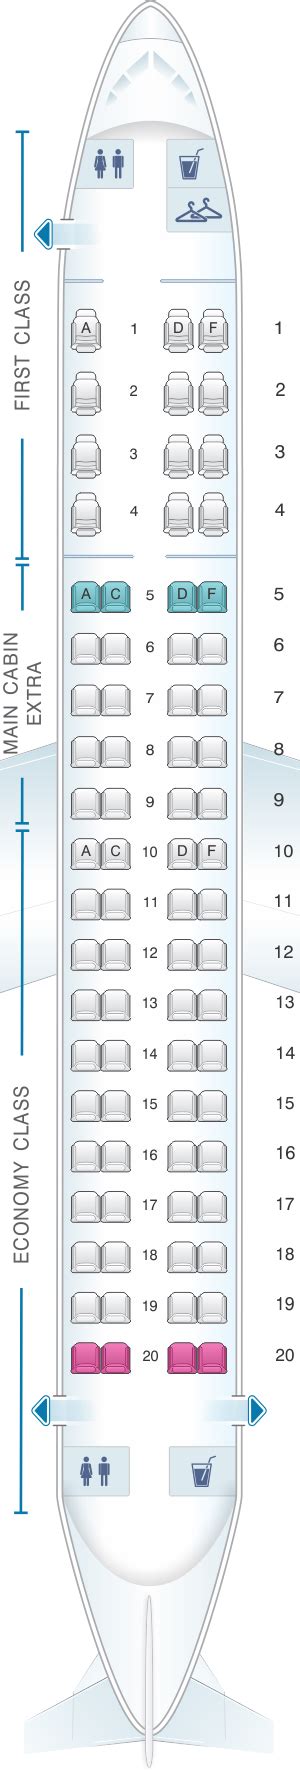 Embraer 175 american airlines seat map. local_pizza. Food & Snacks. Seat 13C is a standard economy aisle seat with 31-32" of seat pitch, which is average across Embraer 175's worldwide. 